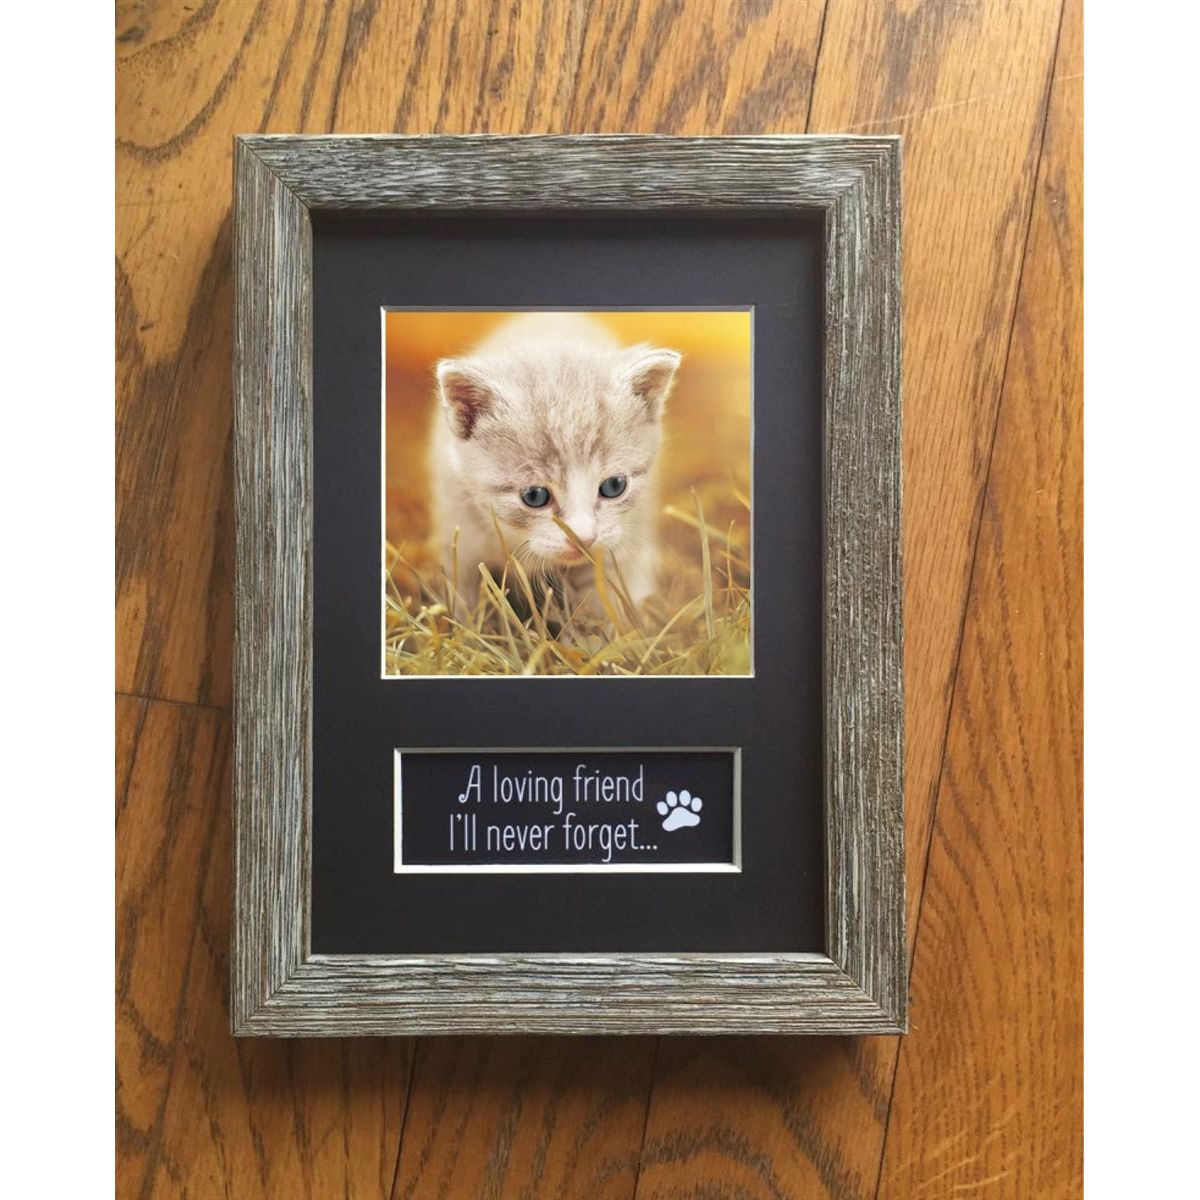 Pet memorial frame with photo of a kitten